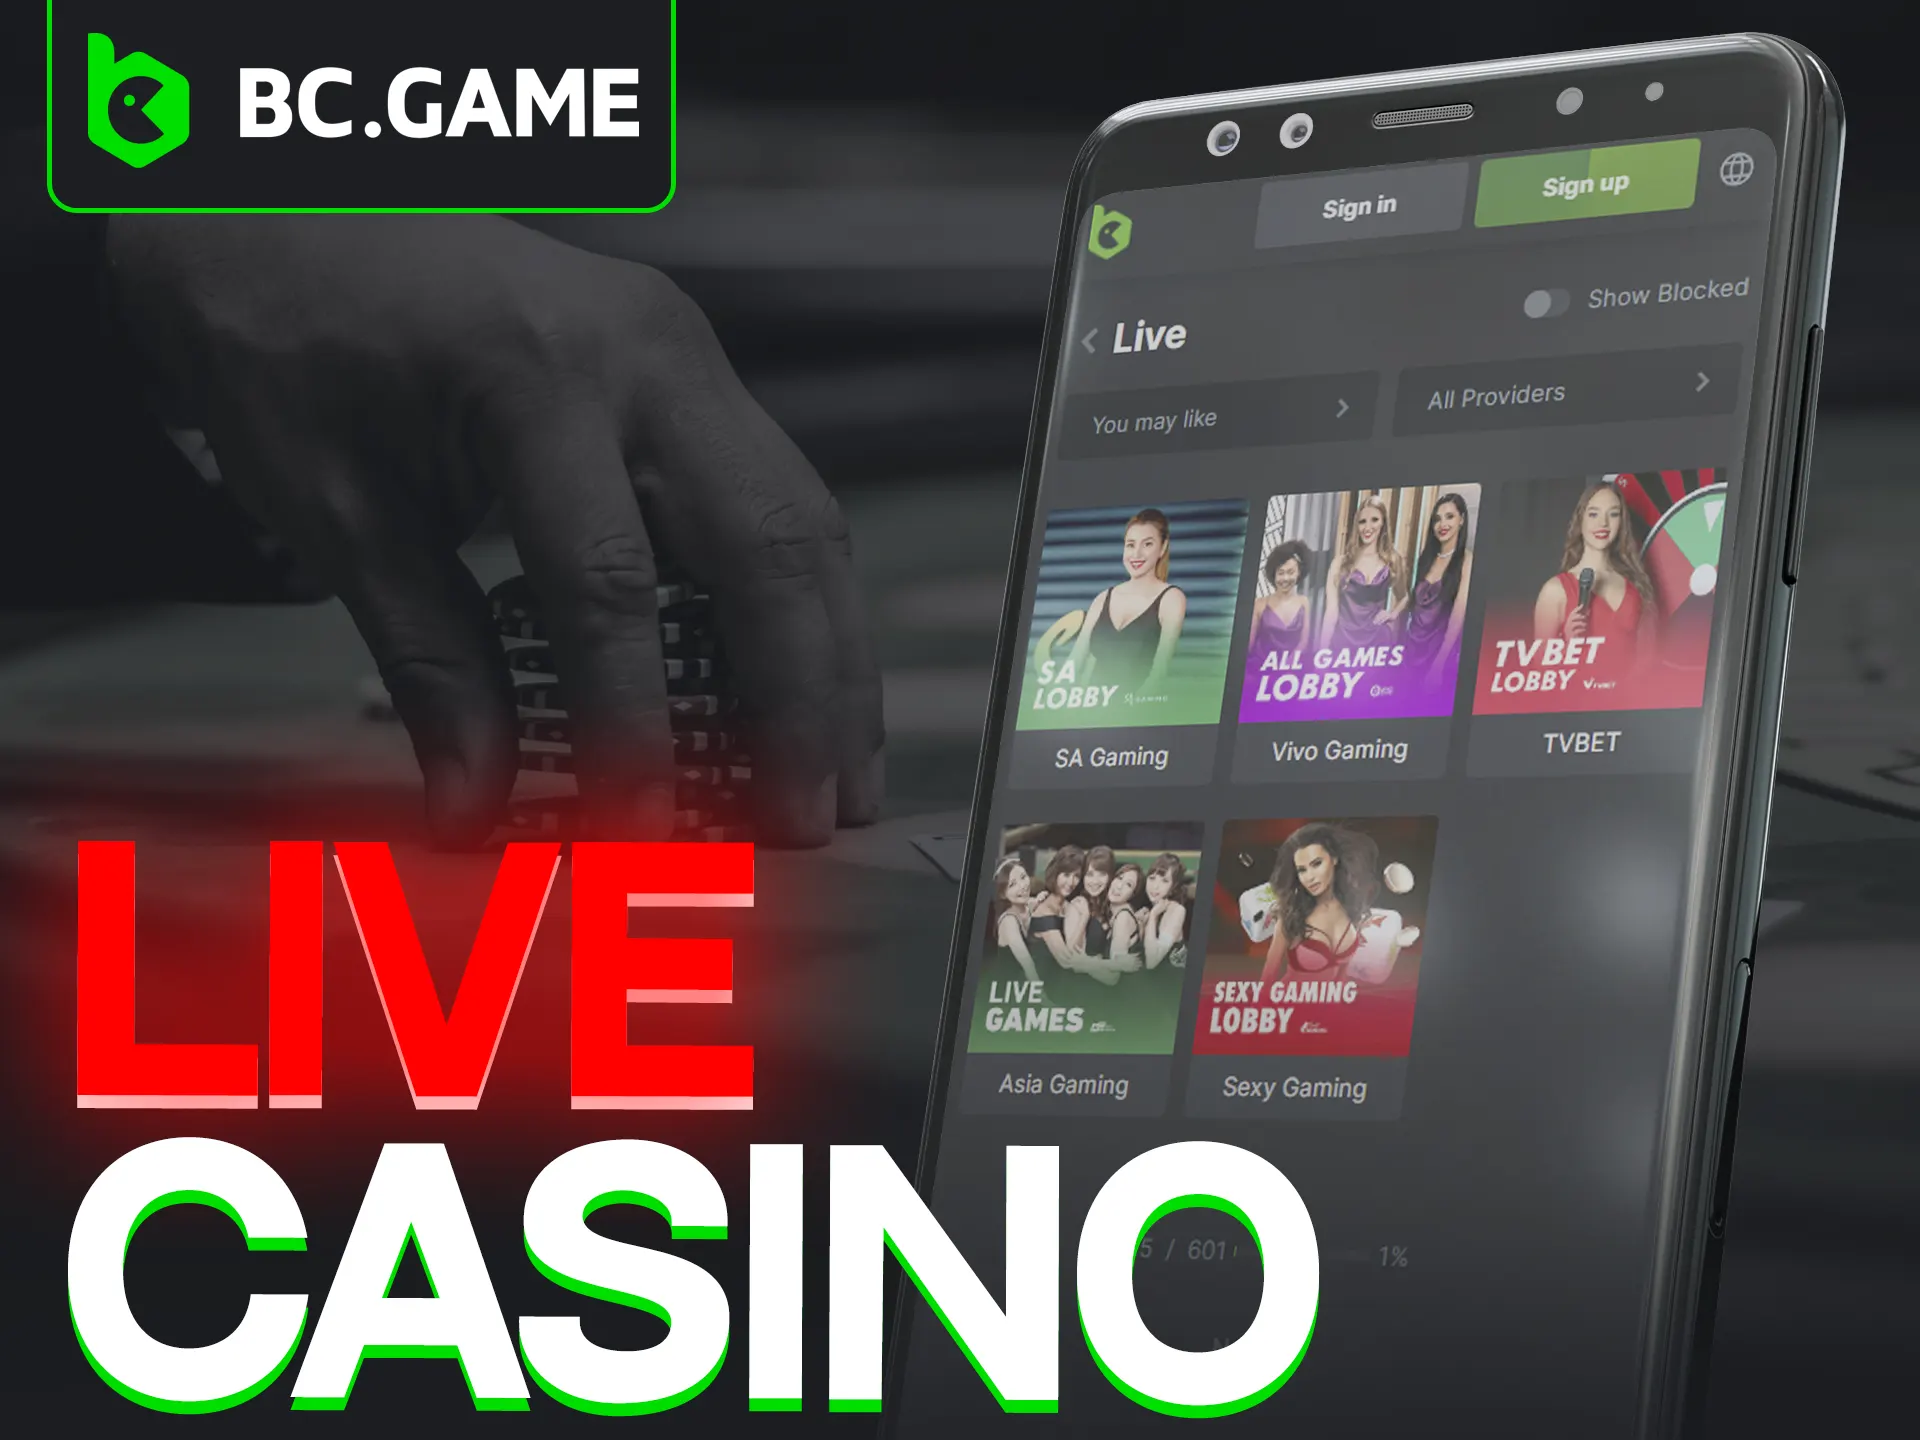 Experience thrilling Live Casino action through BC Game app.